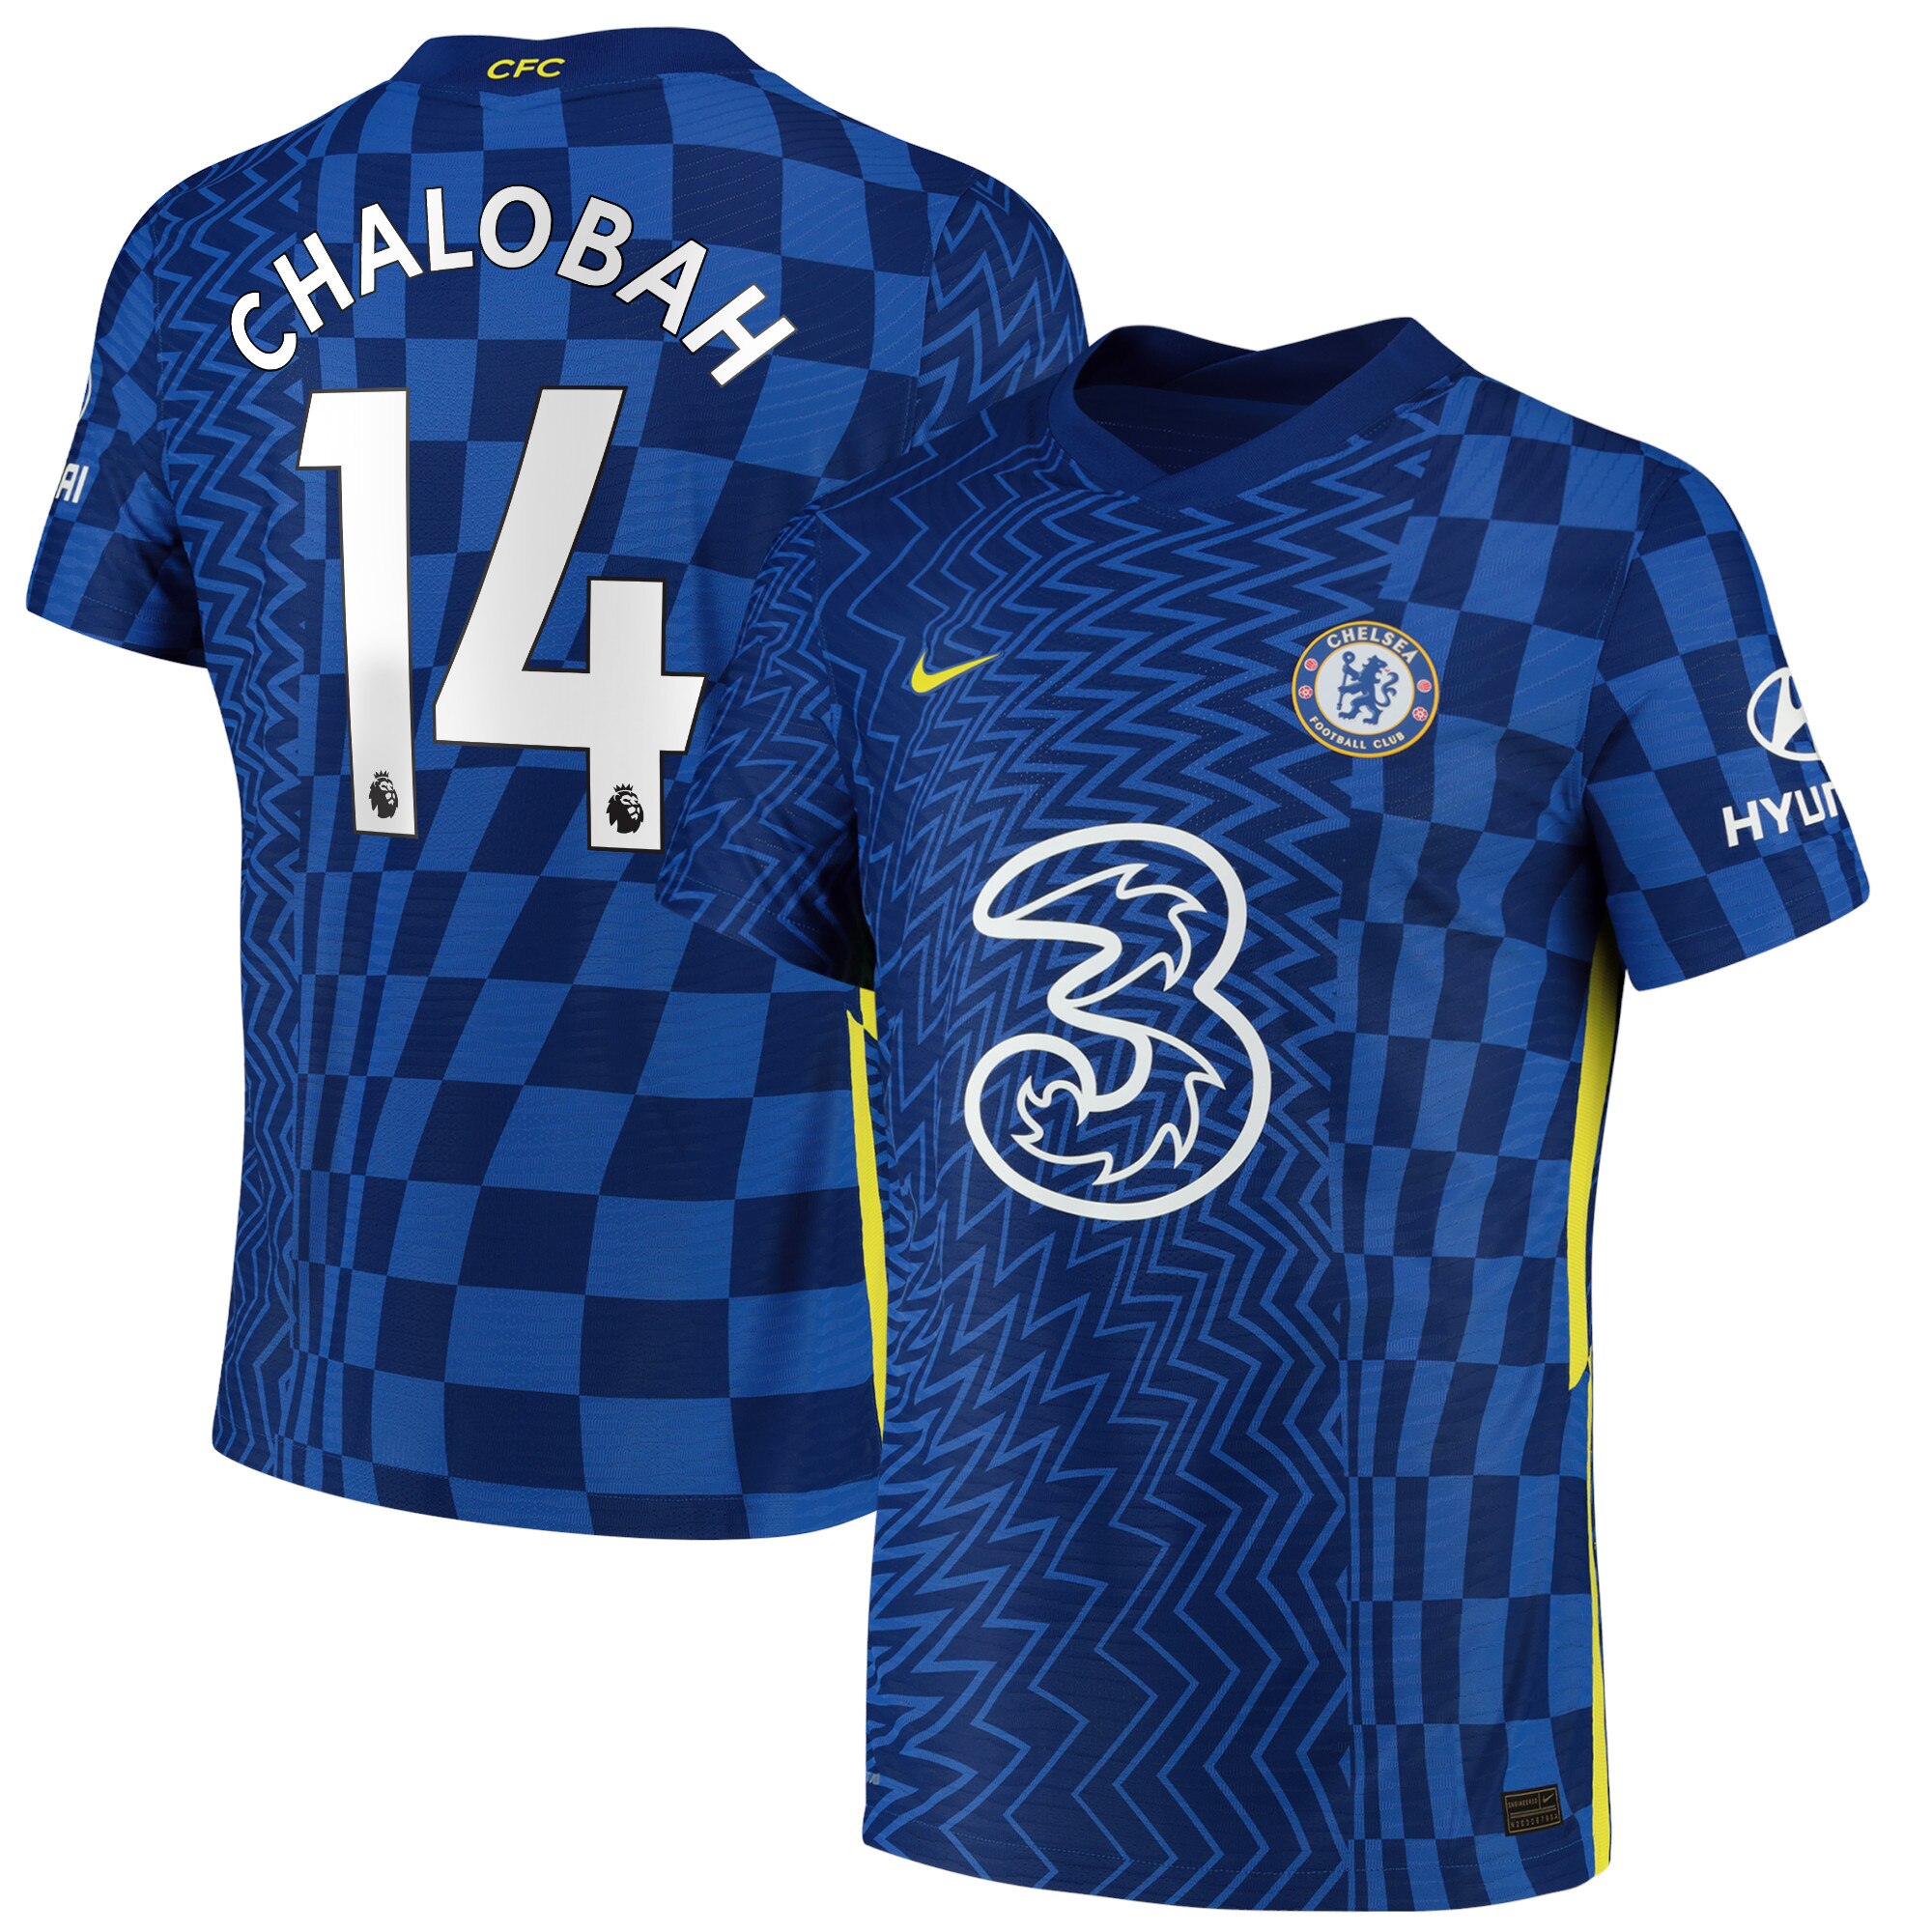 Chelsea Home Vapor Match Shirt 2021-22 with Chalobah 14 printing